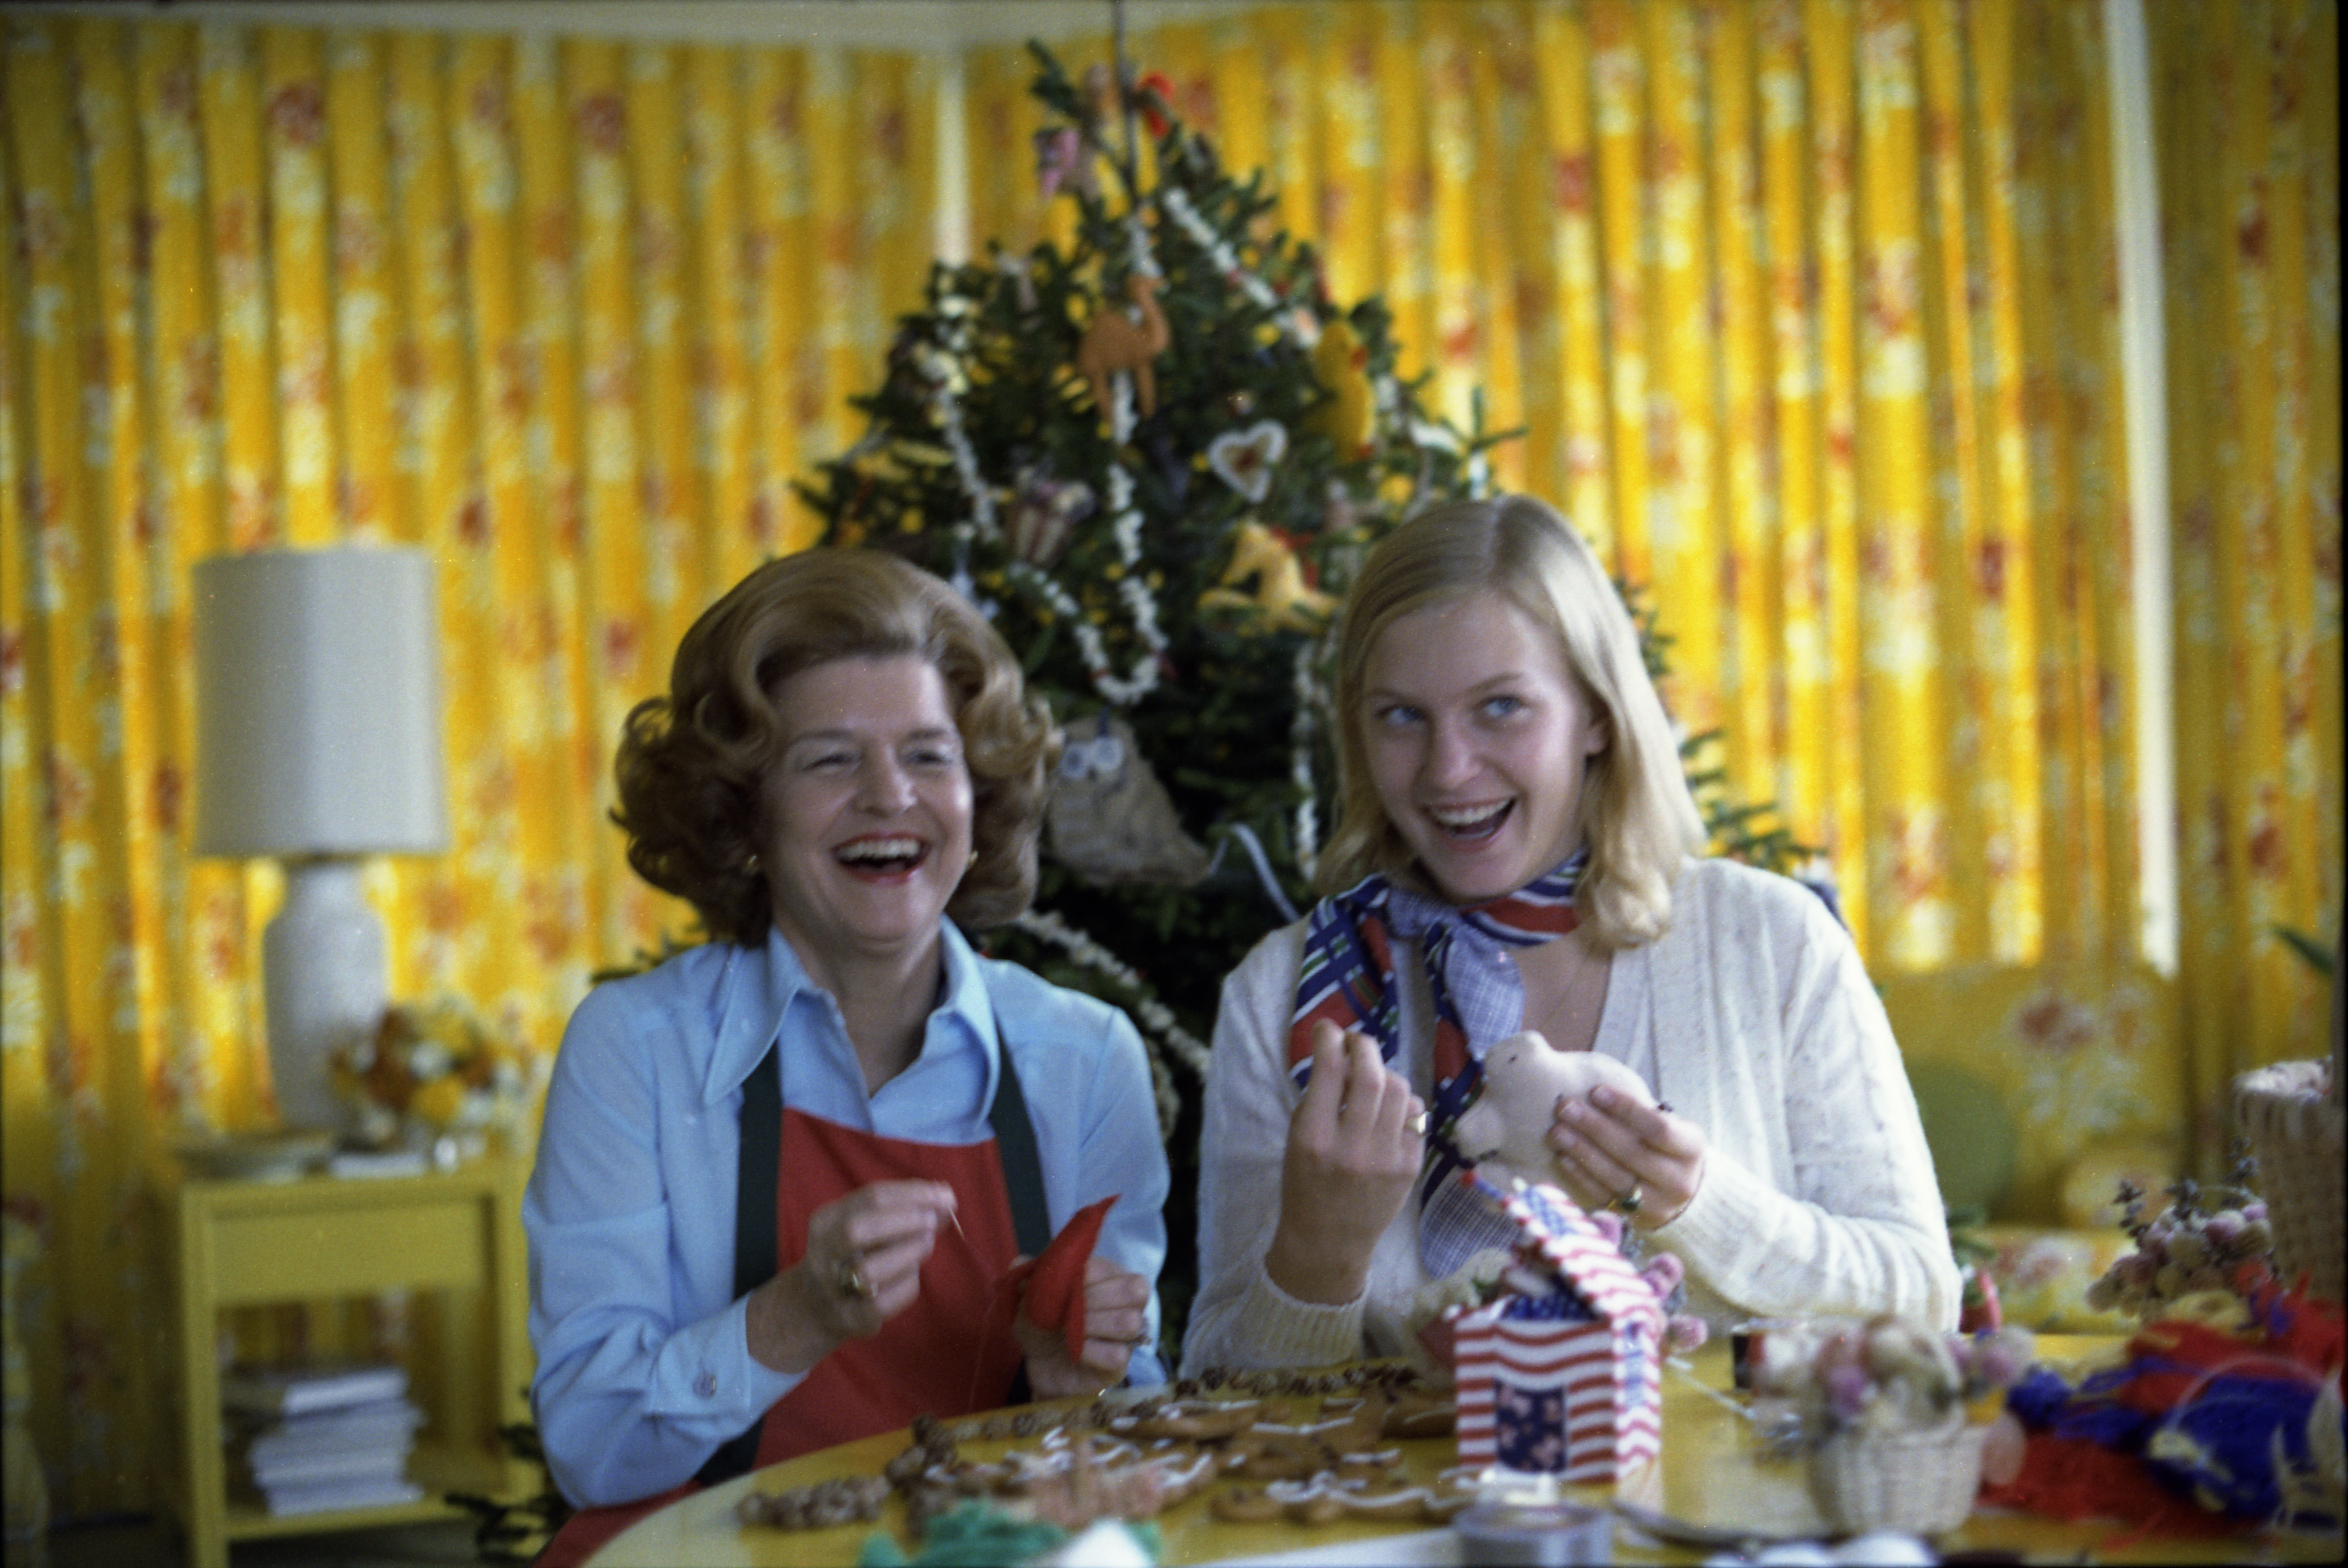 Having selected “handmade and folksy” as the theme for Christmas at the White House, First Lady Betty Ford makes homemade ornaments with daughter Susan for the tree in the third floor Solarium during a photo-op for Parade Magazine.  